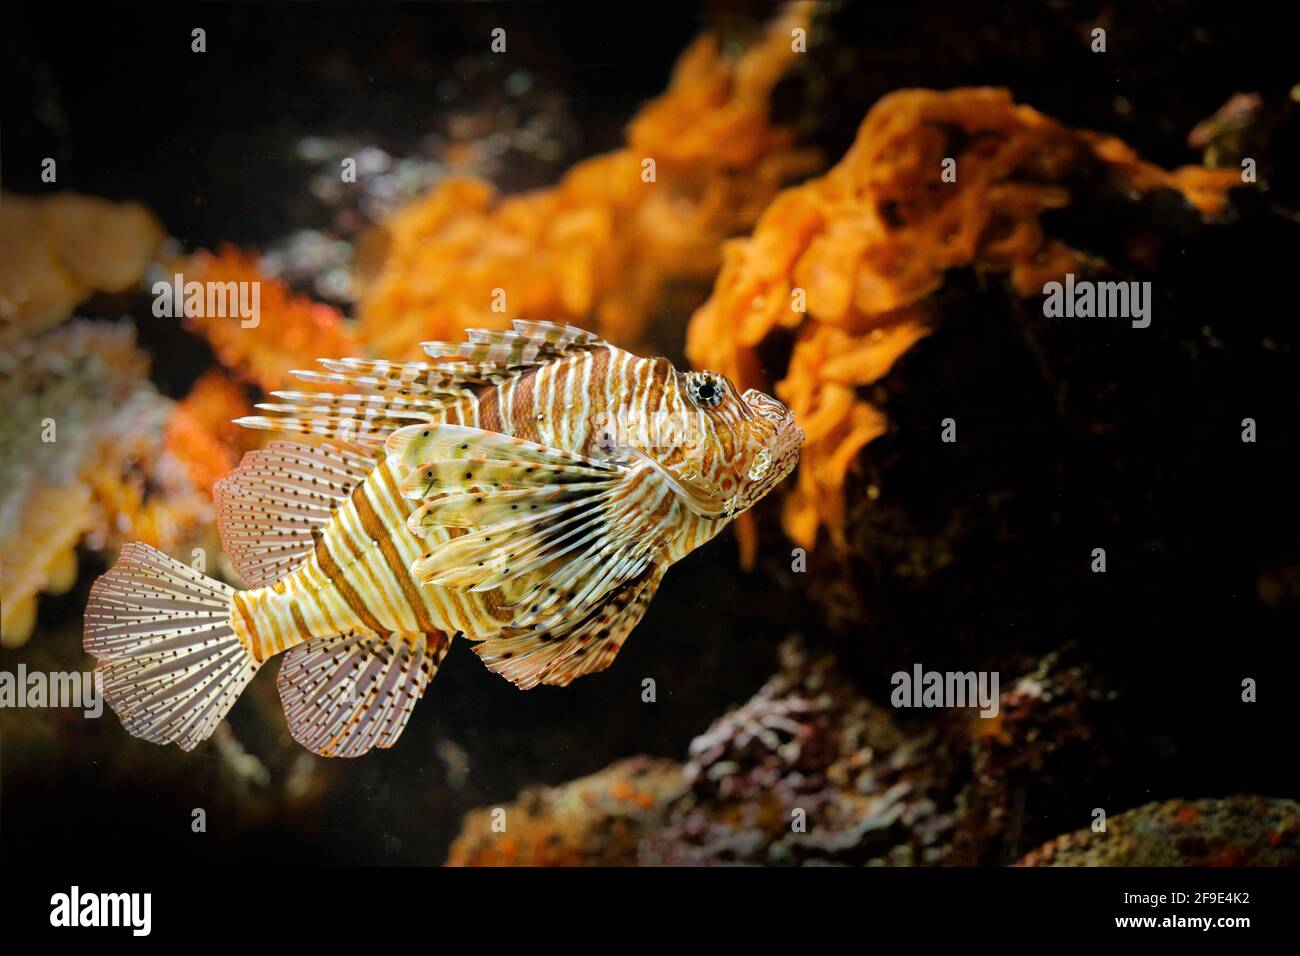 Pterois volitans, Red Lionfish, danger poison fish in the sea water. Lion fish in the nature ocean habitat.  Marine life. Stock Photo